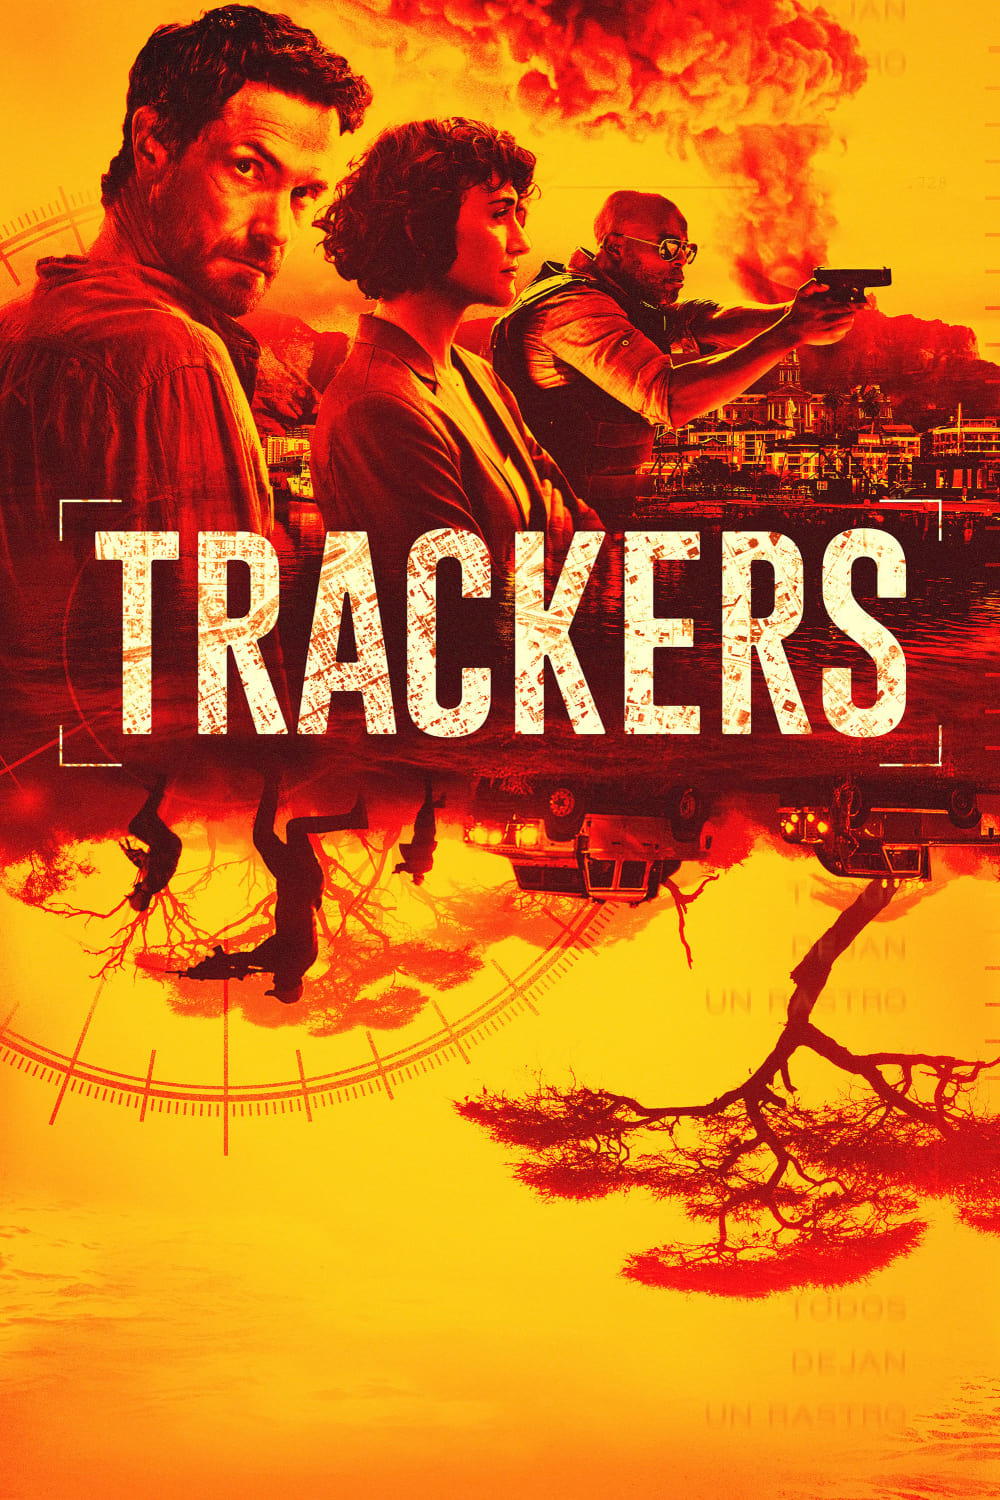 Trackers TV Shows About Terrorism